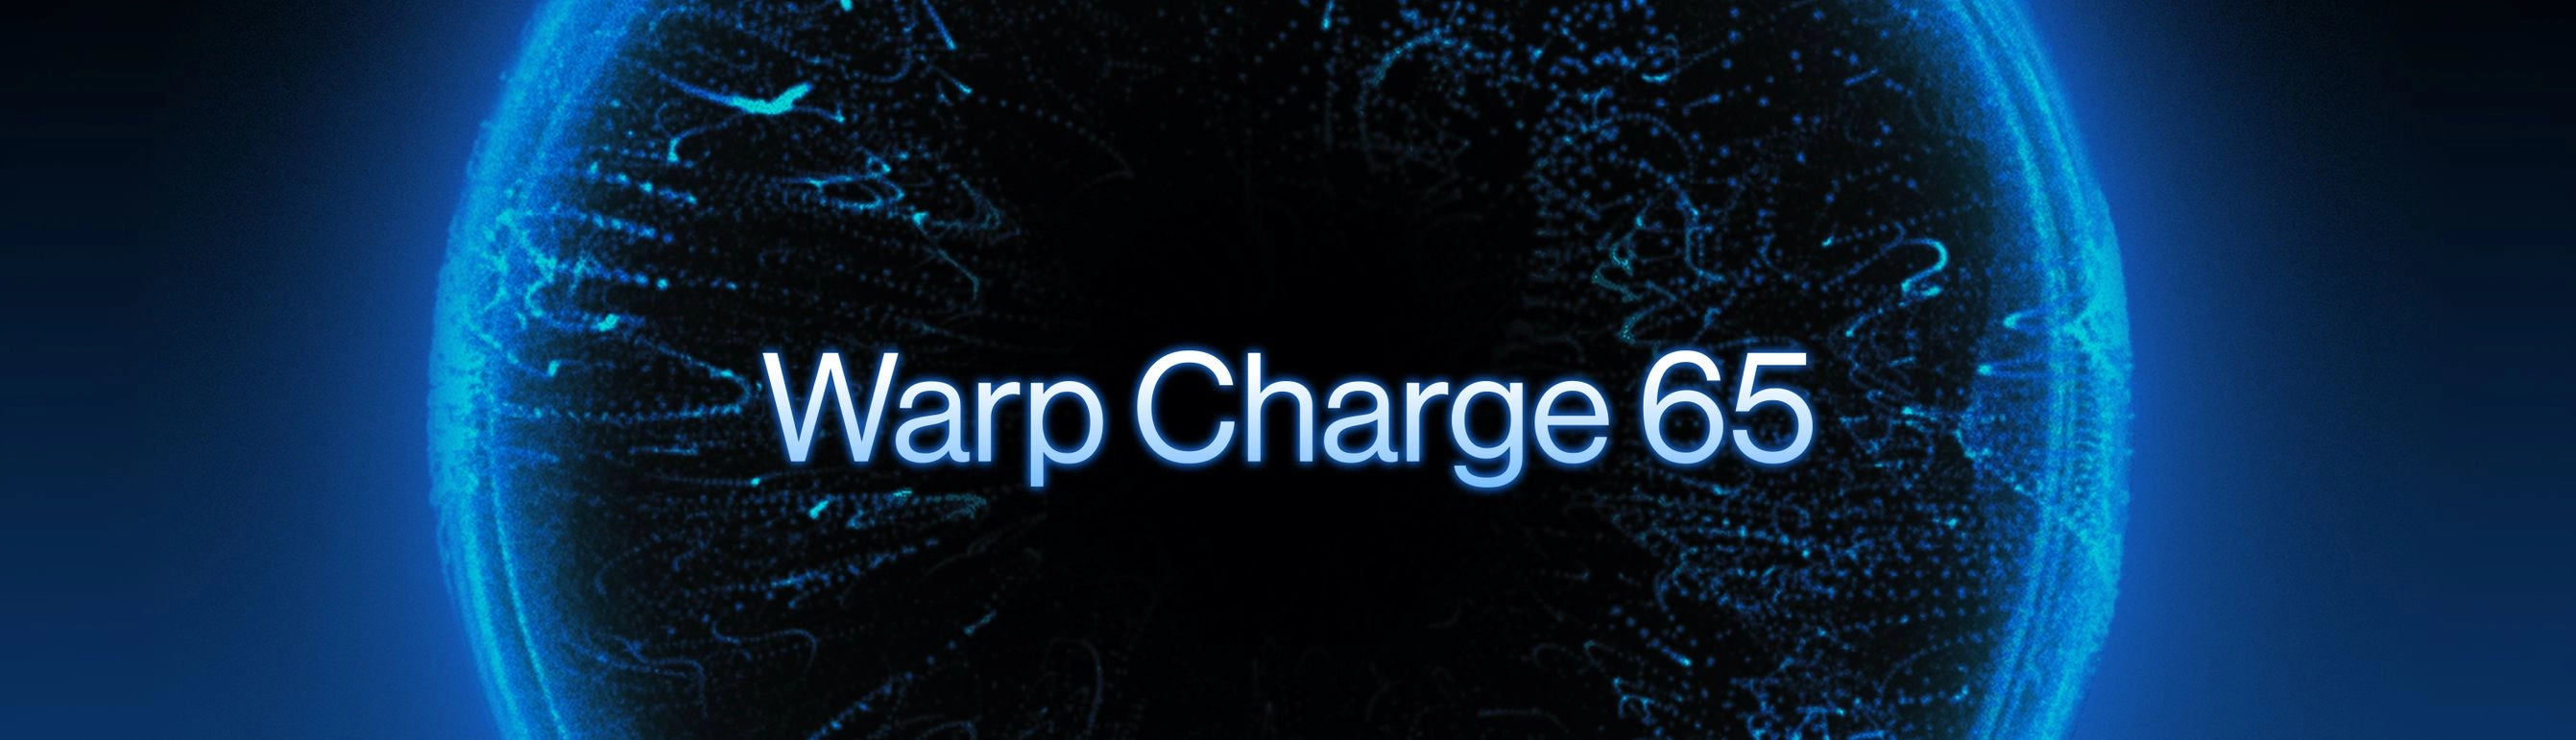 charge popup charged up bg pc 111025.jpg